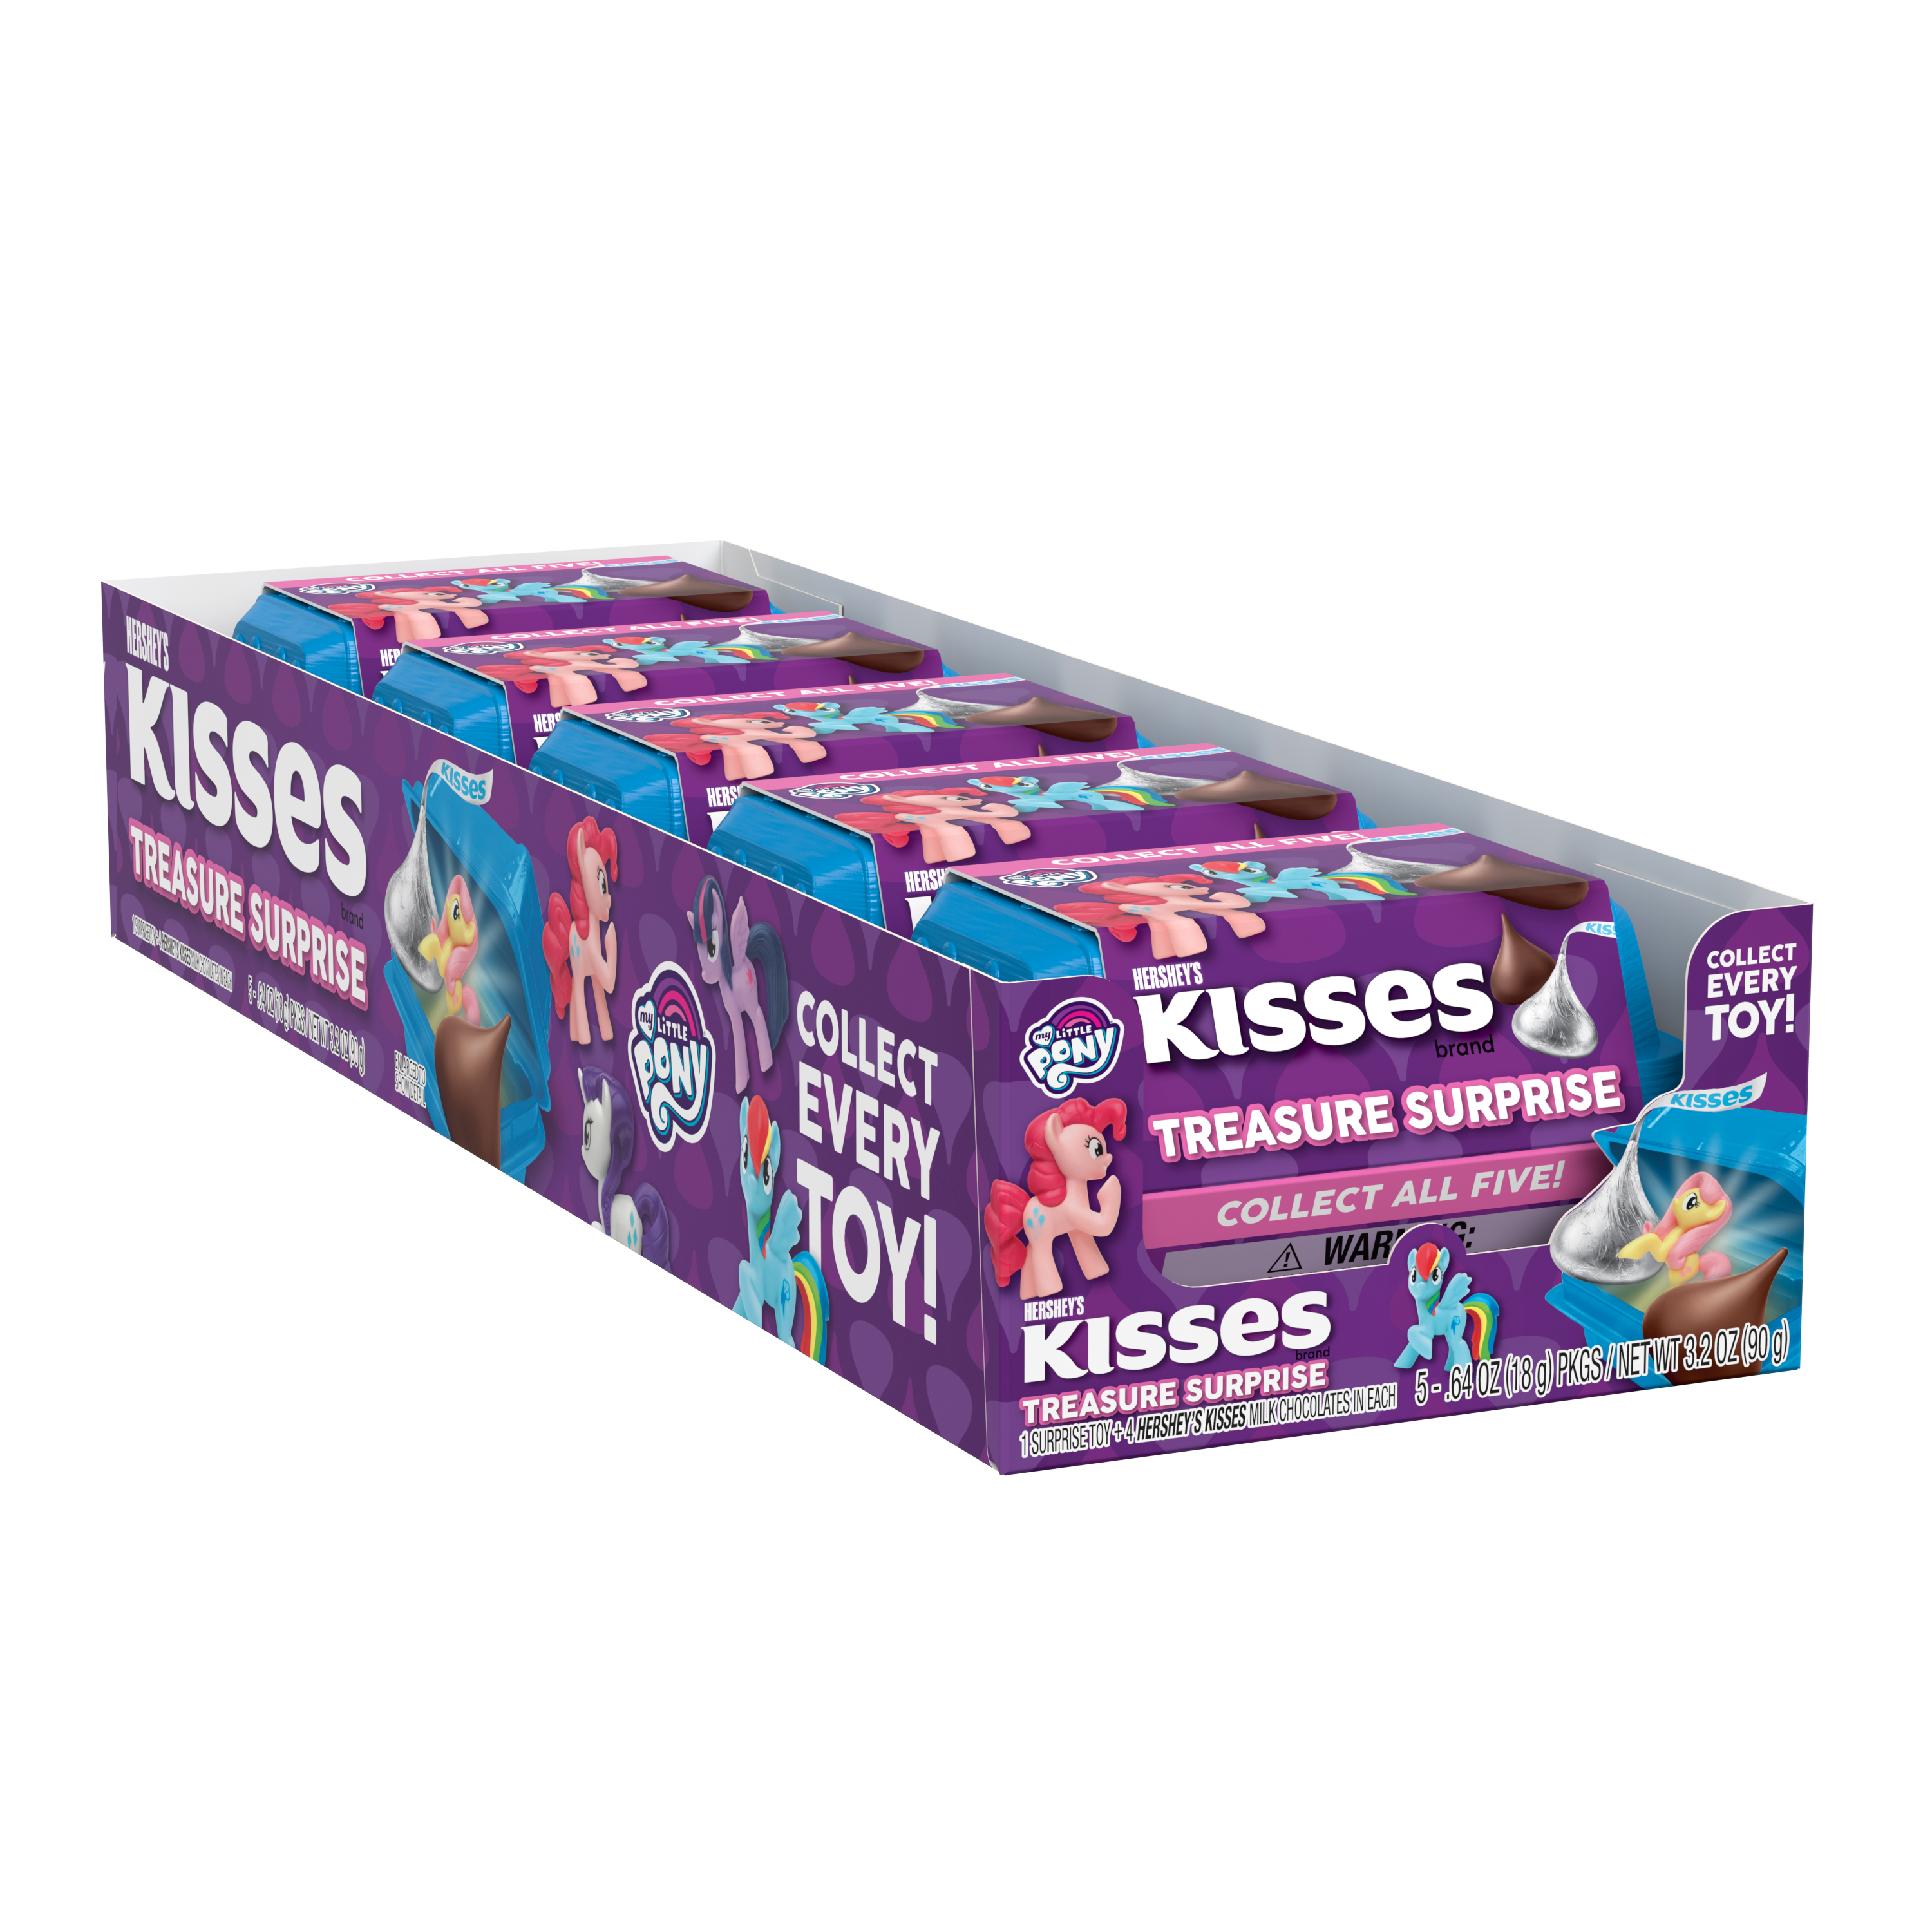 HERSHEY'S KISSES My Little Pony Milk Chocolate Treasure Surprise, 3.2 oz box, 5 pack - Left Side of Package